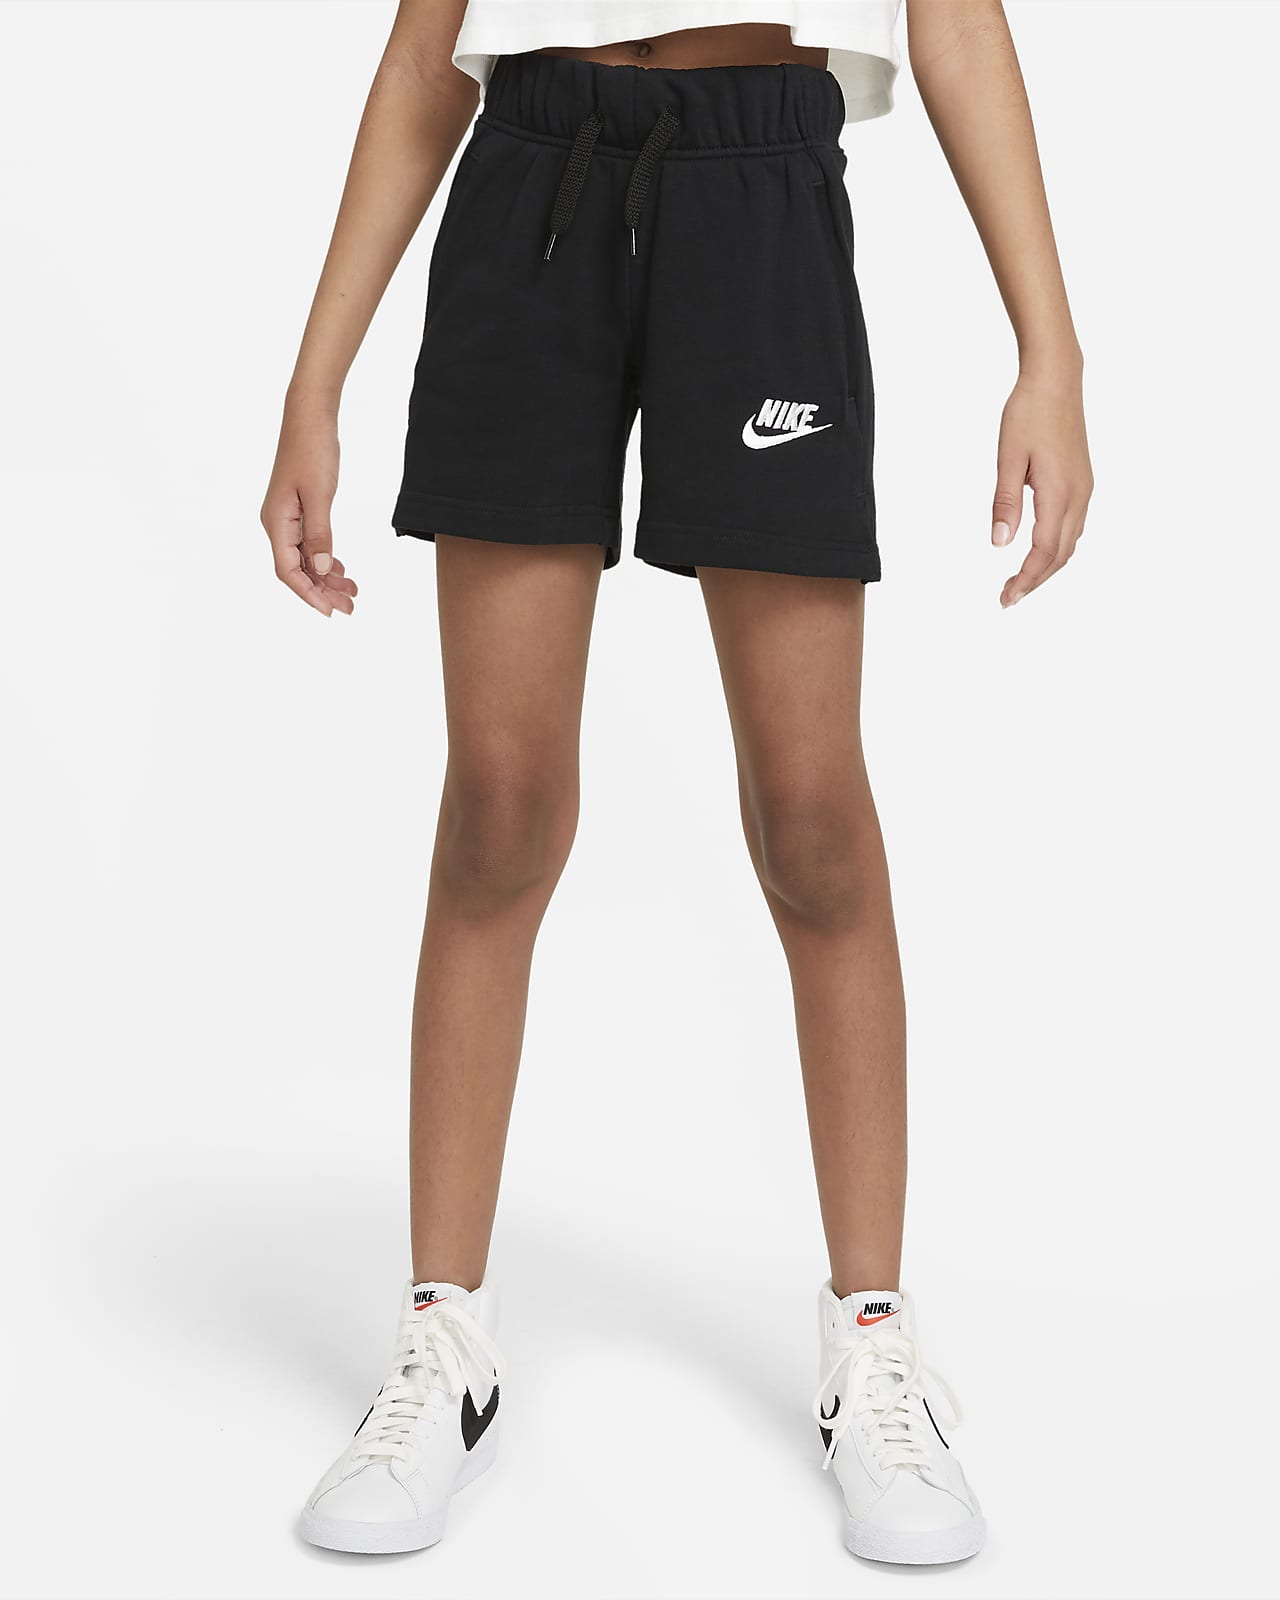 https://static.nike.com/a/images/t_PDP_1280_v1/f_auto,q_auto:eco/b3f792a6-13a2-4fcd-9e17-acee70cd6bfb/sportswear-club-older-french-terry-shorts-XZcxFb.png